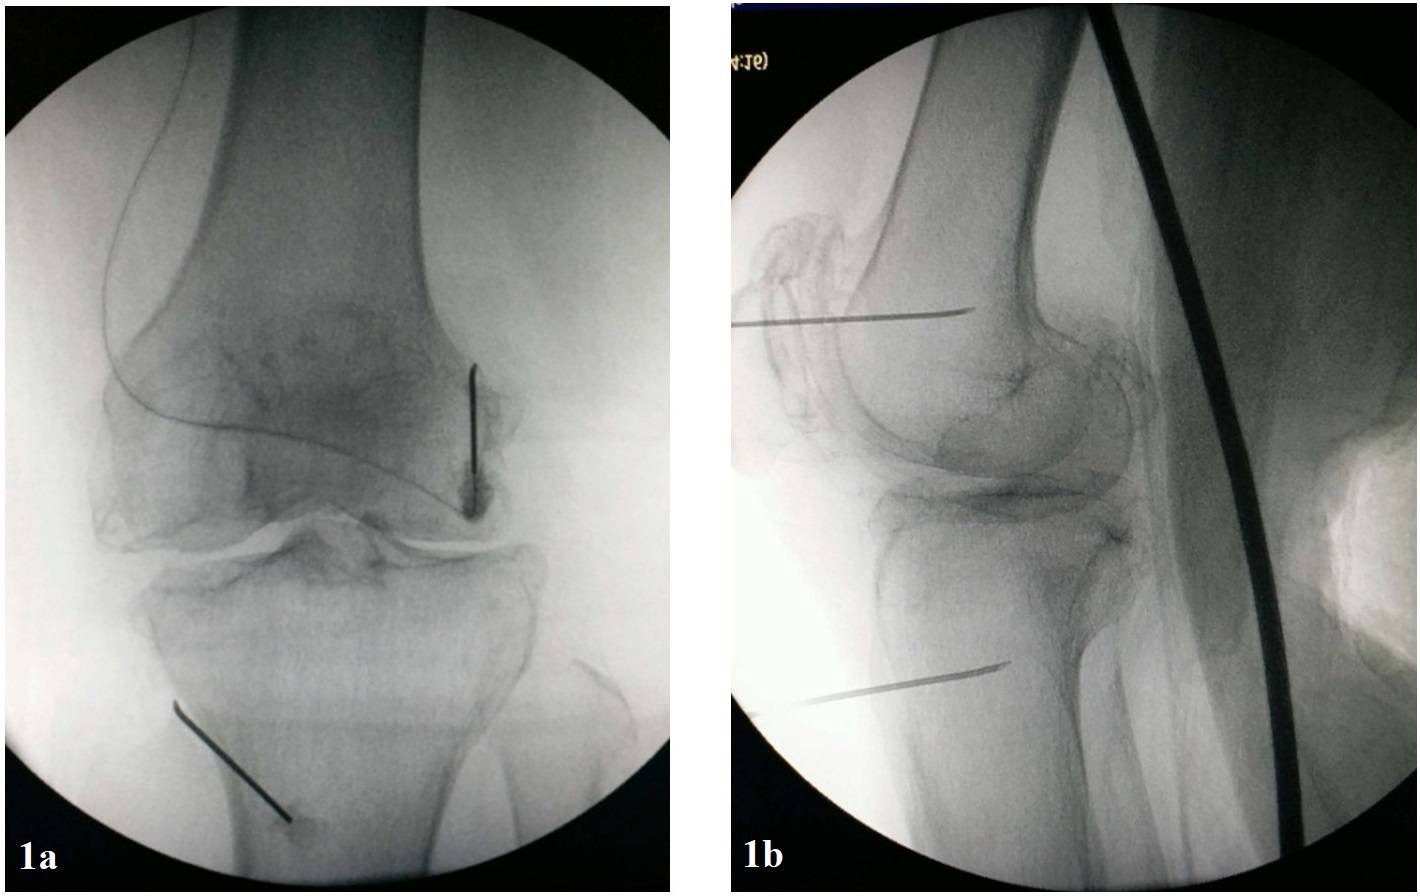 Fluoroscopic guidance imaging of (1a) antero-posterior and (1b) lateral views of the knee joint demonstrated the position of the radiofrequency cannula at superior lateral and inferior medial genicular nerves.